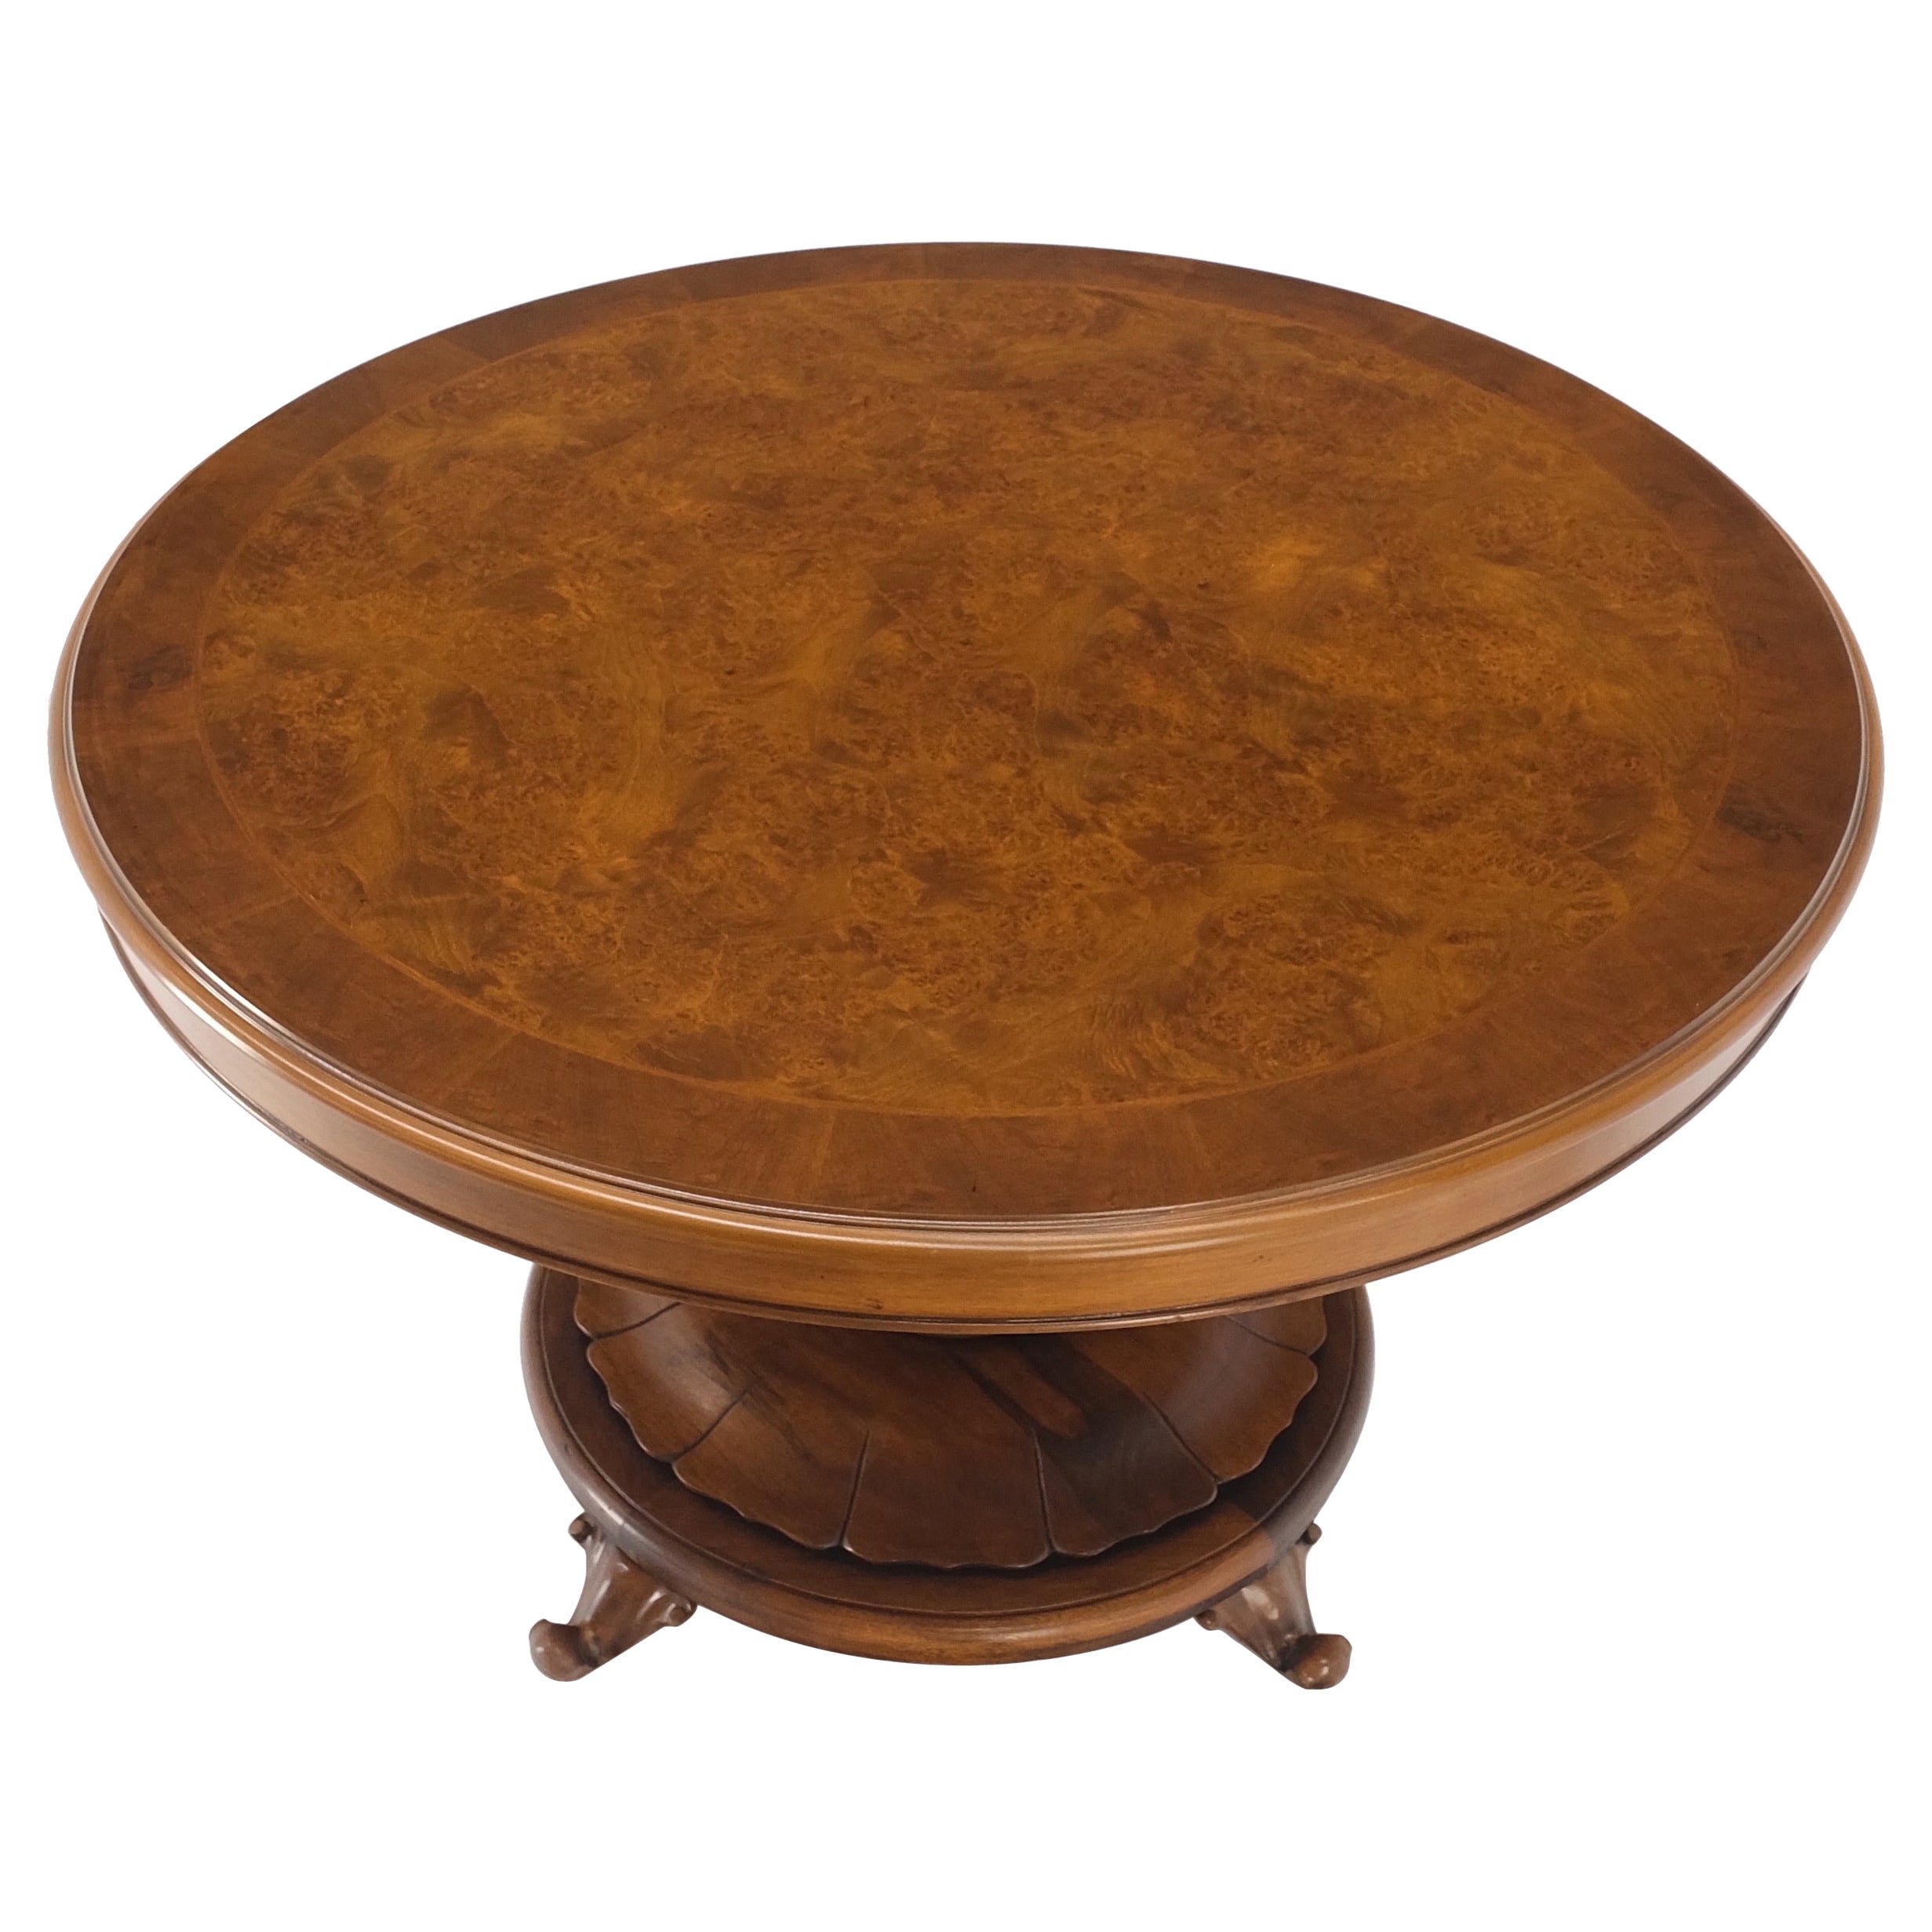 Burl Walnut Wood Top Round Carved Lotus Shape Base Dining Center Table Mint!